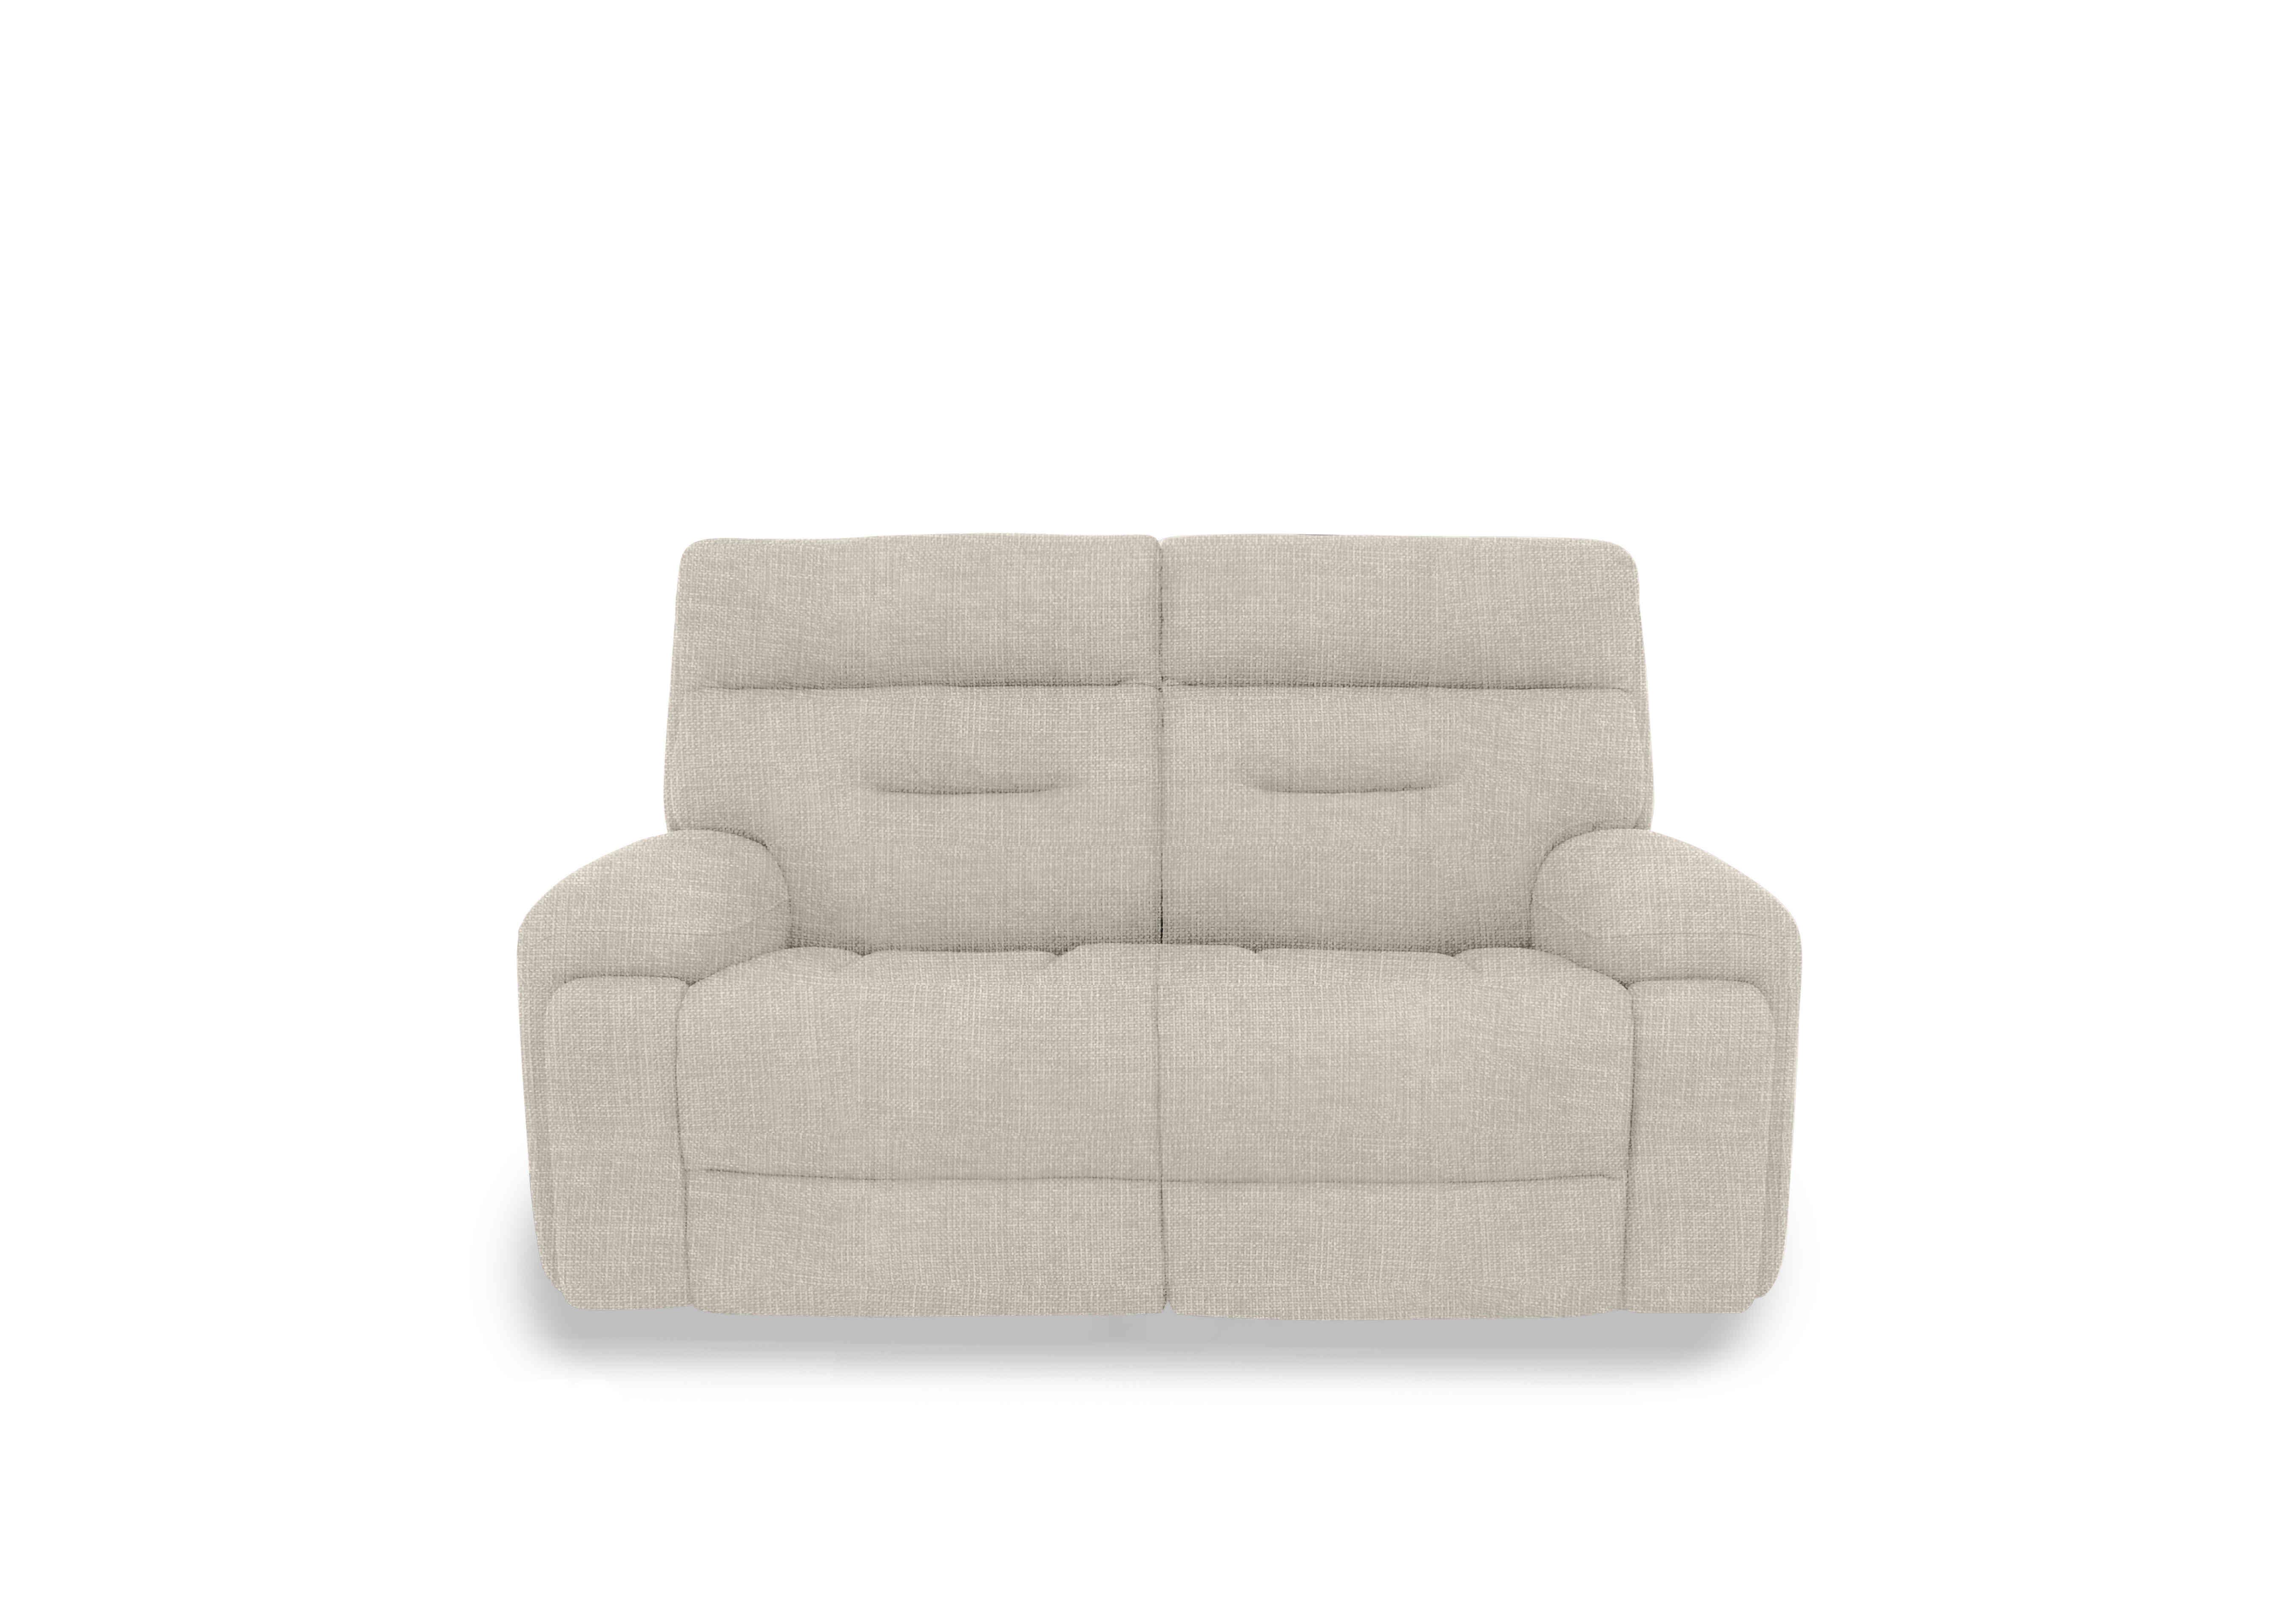 Cinemax 2 Seater Fabric Sofa in We-0102  Weave Stone on Furniture Village